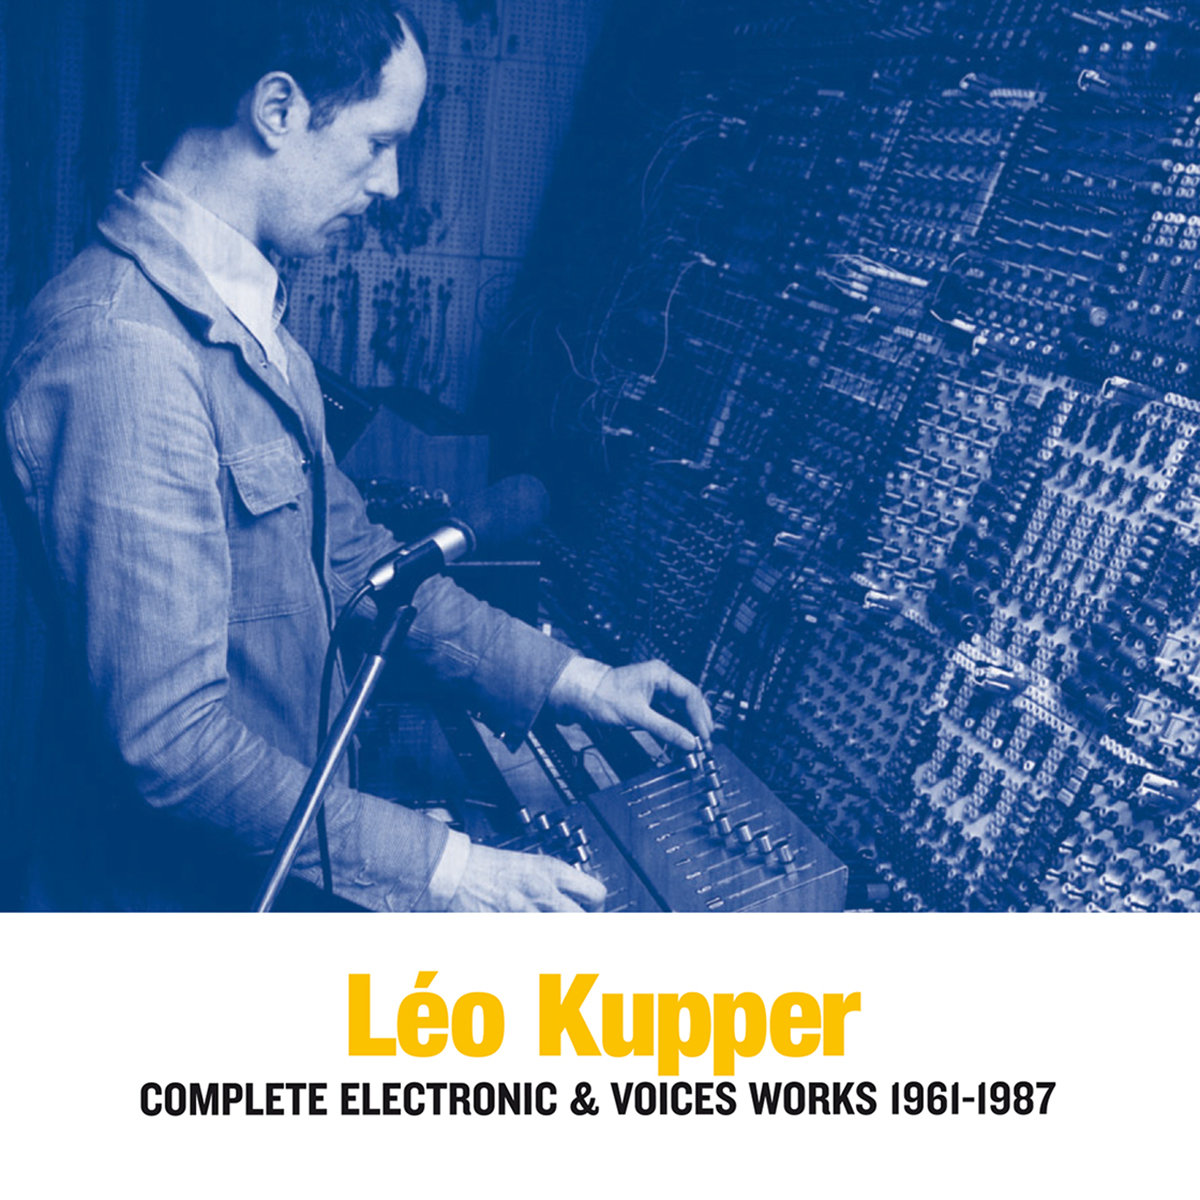 COMPLETE ELECTRONIC & VOICES WORKS 1961-1987